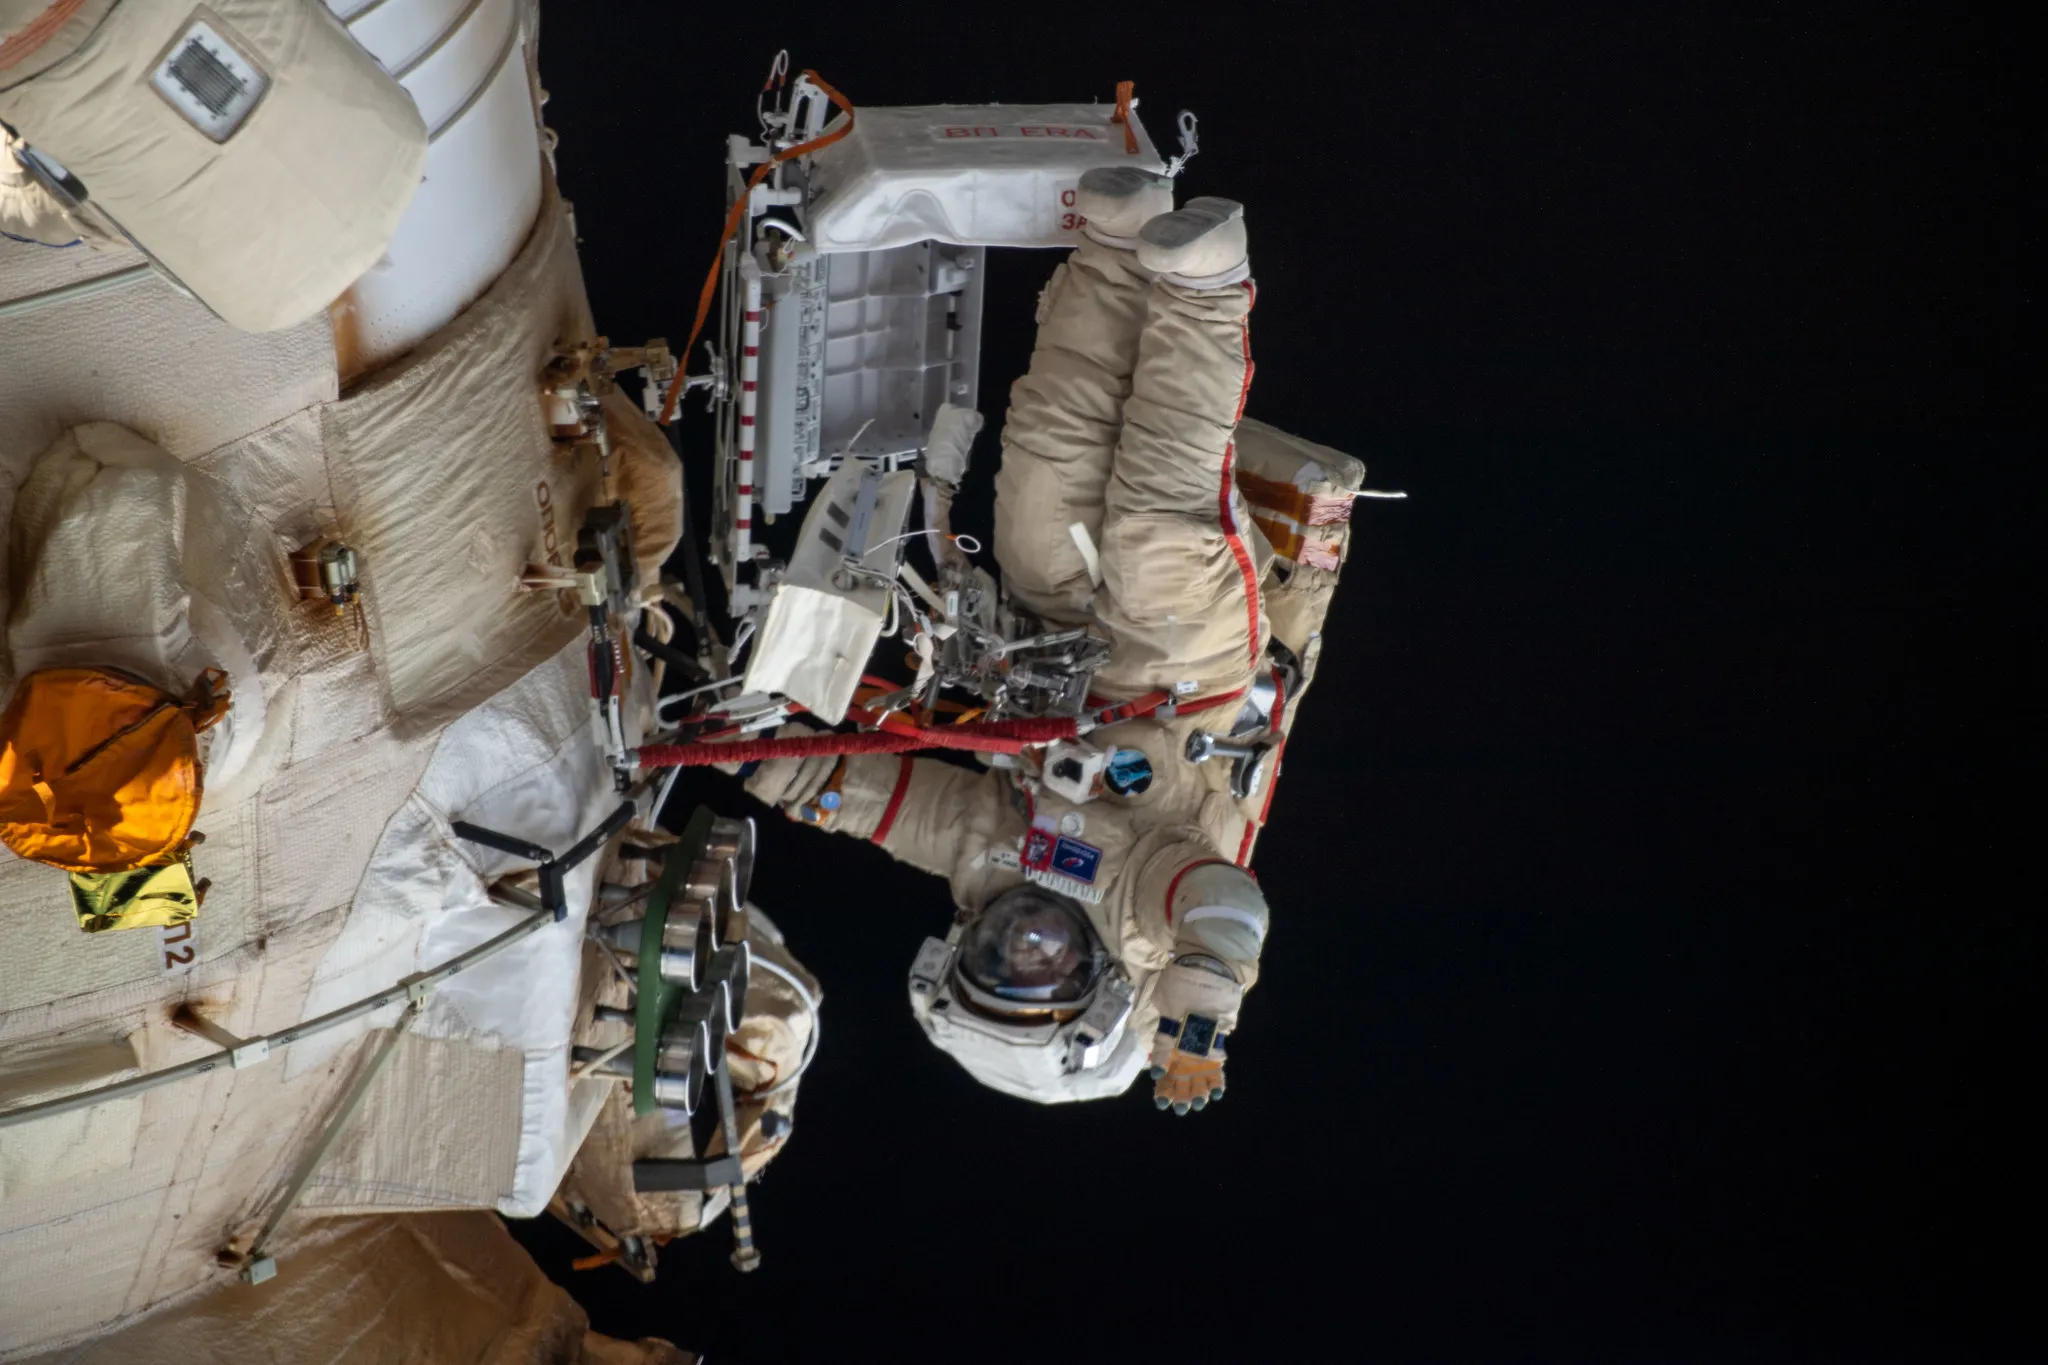 (April 18, 2022) — Cosmonaut Oleg Artemyev waves to the camera while working outside the Nauka multipurpose laboratory module during a spacewalk that lasted for six hours and 37 minutes to outfit Nauka and configure the European robotic arm on the International Space Station’s Russian segment.